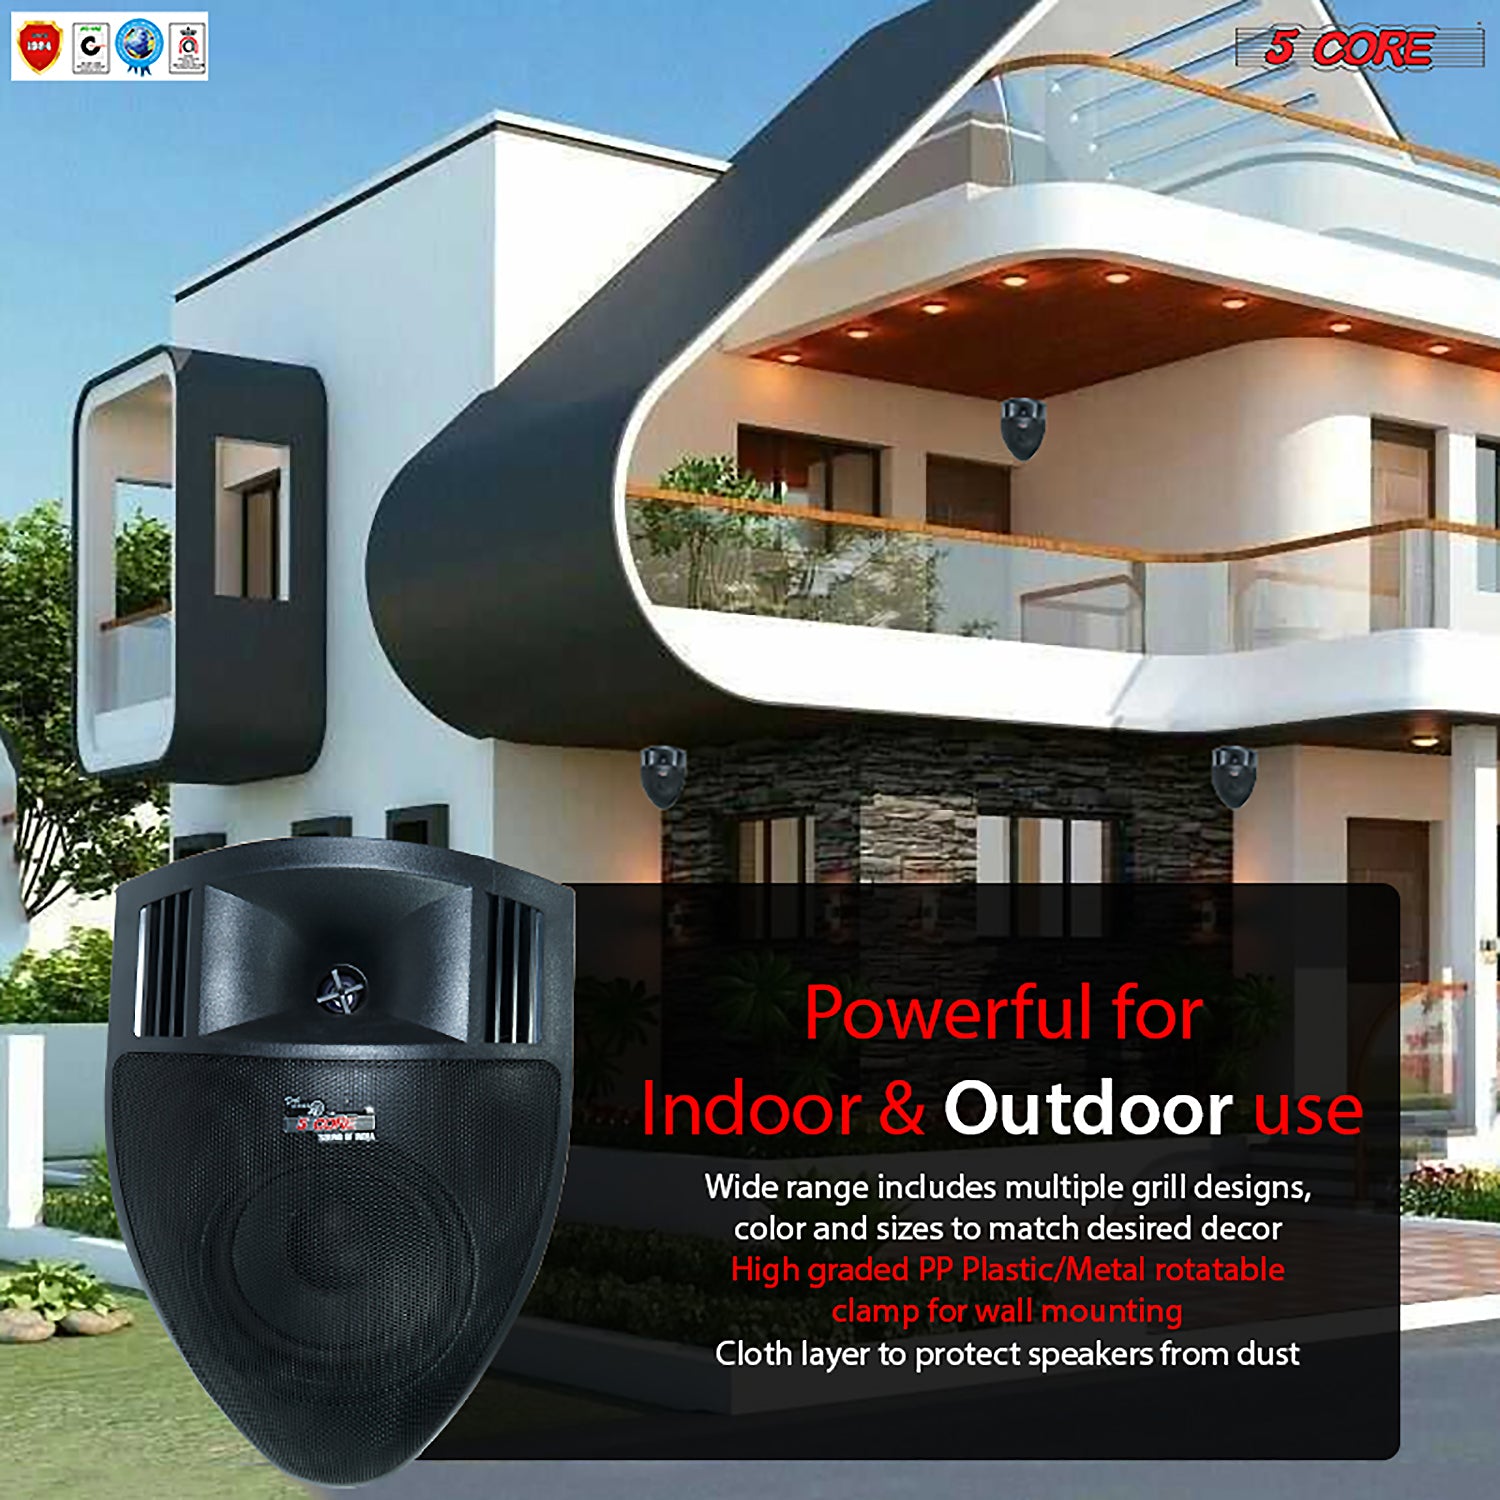 5 Core Outdoor Speaker Wired Waterproof System Wall Mounted Indoor Outside Patio Backyard Surround Sound Home Exterior CORNER